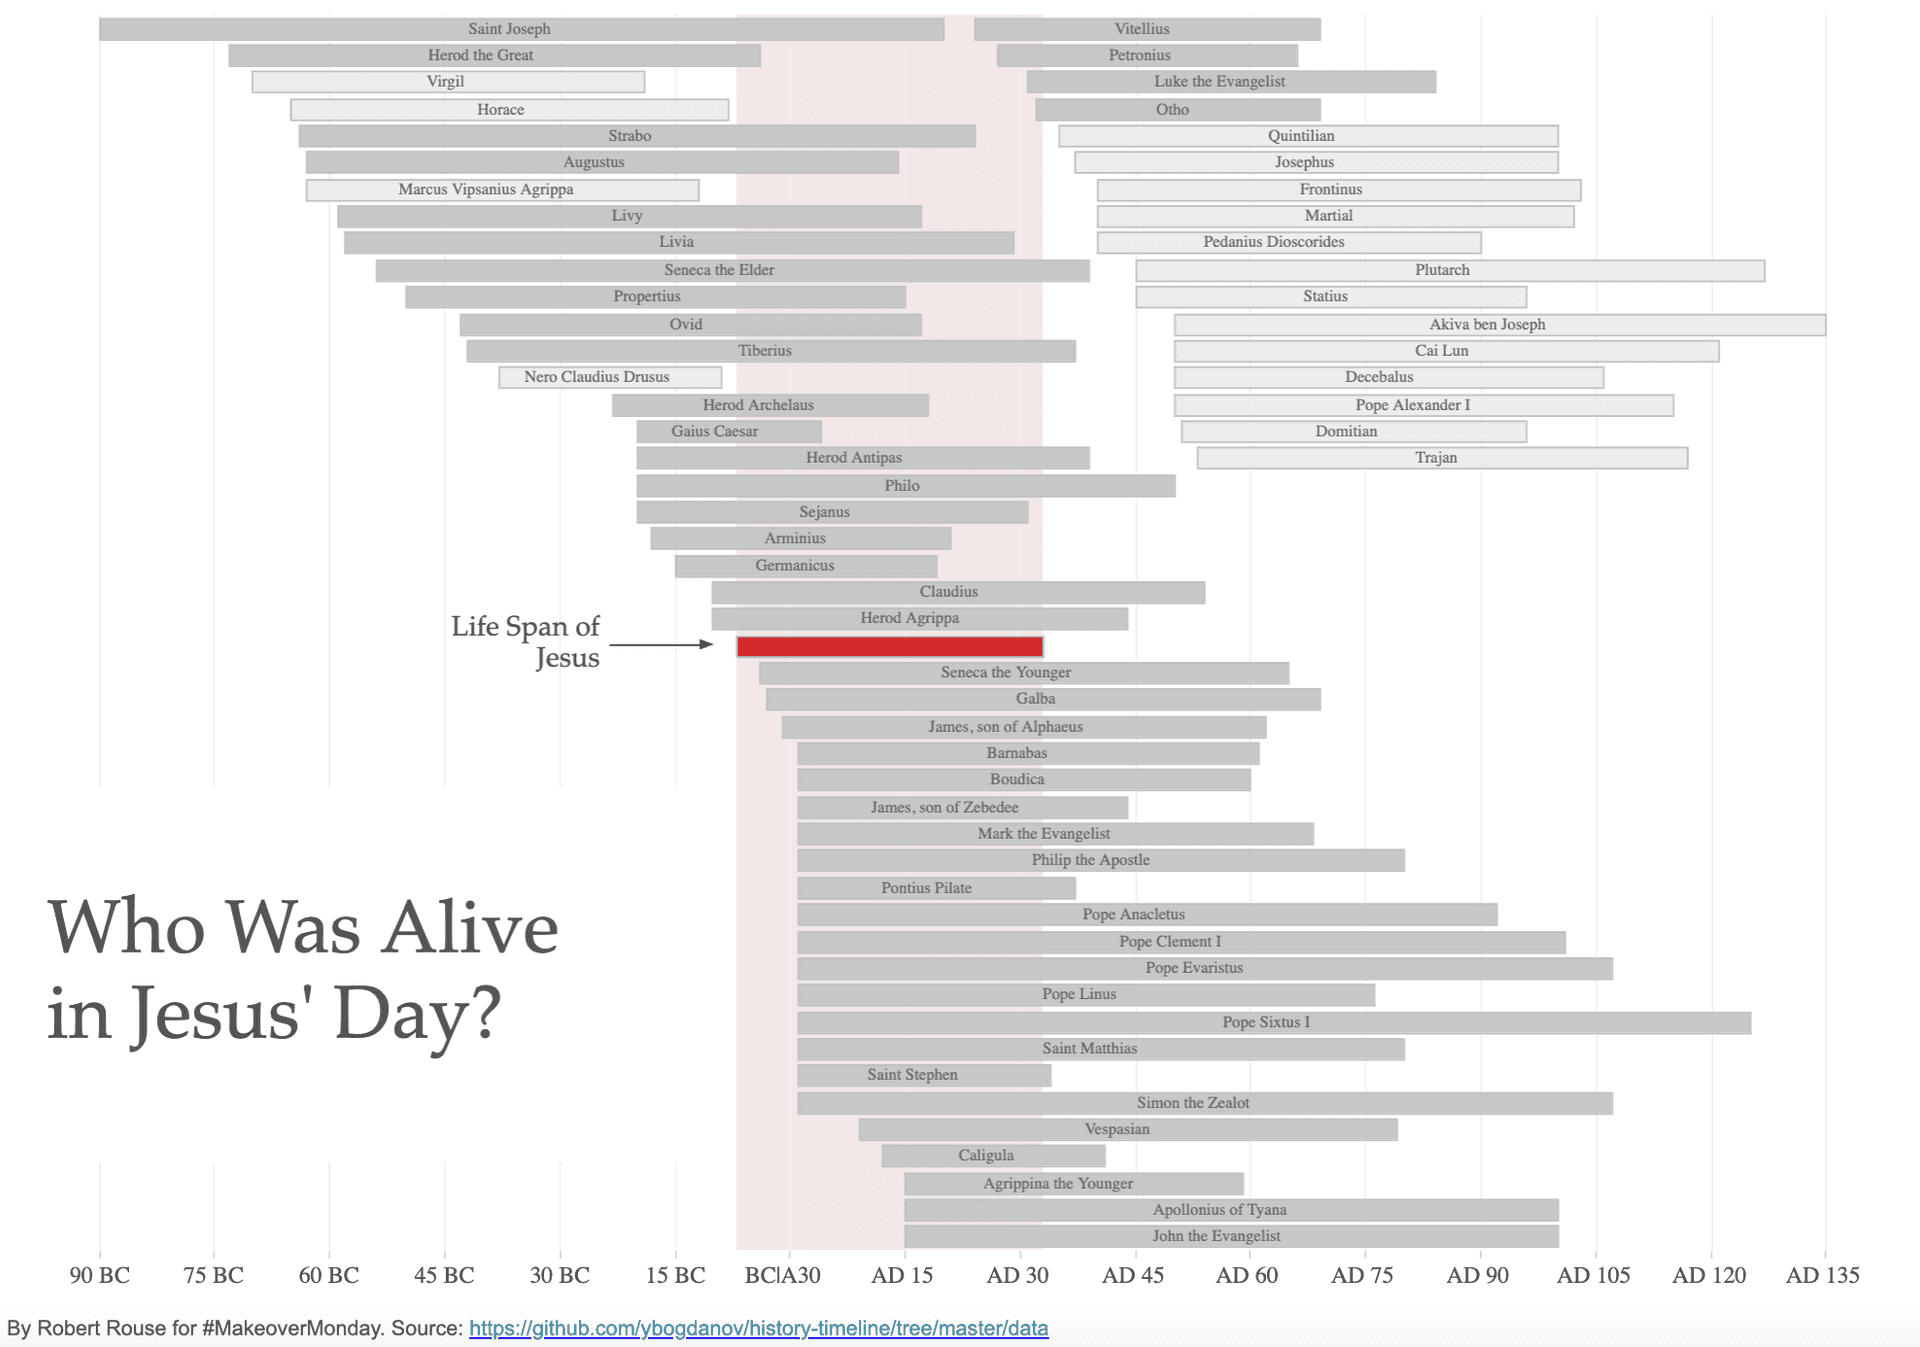 Who was Alive in Jesus’ Day?